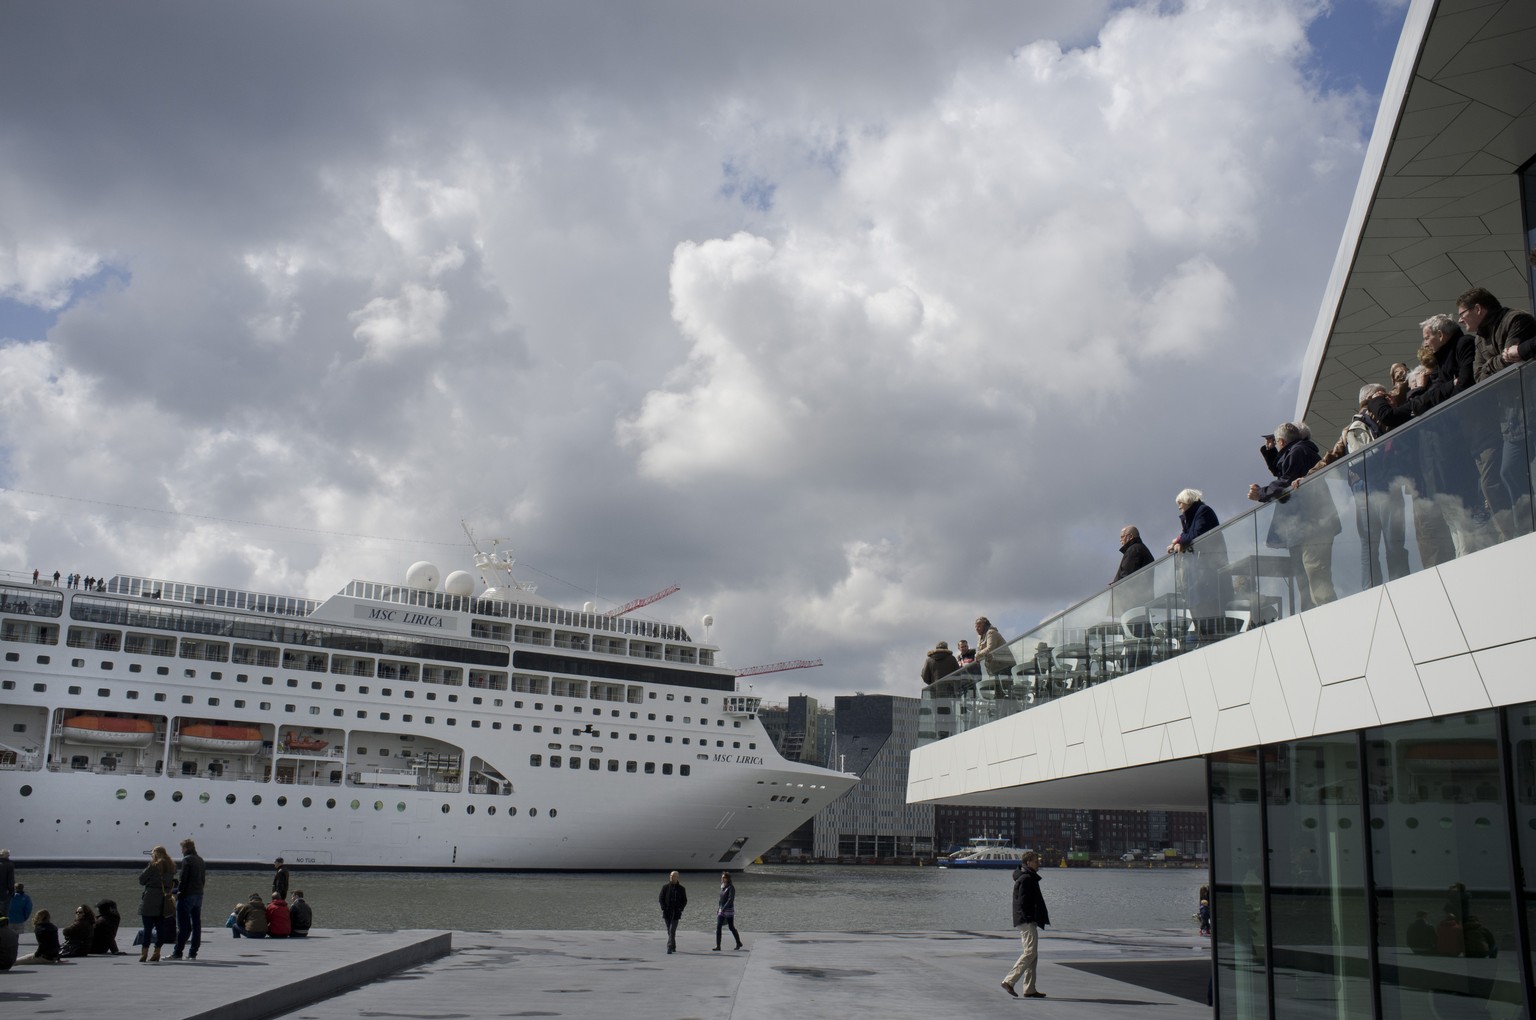 FILE - People visiting the new EYE Film Instute take pictures of the MSC Lirica, a Panama-registered cruise ship passing on IJ river in Amsterdam, Netherlands, April 21, 2012. Amsterdam municipality w ...